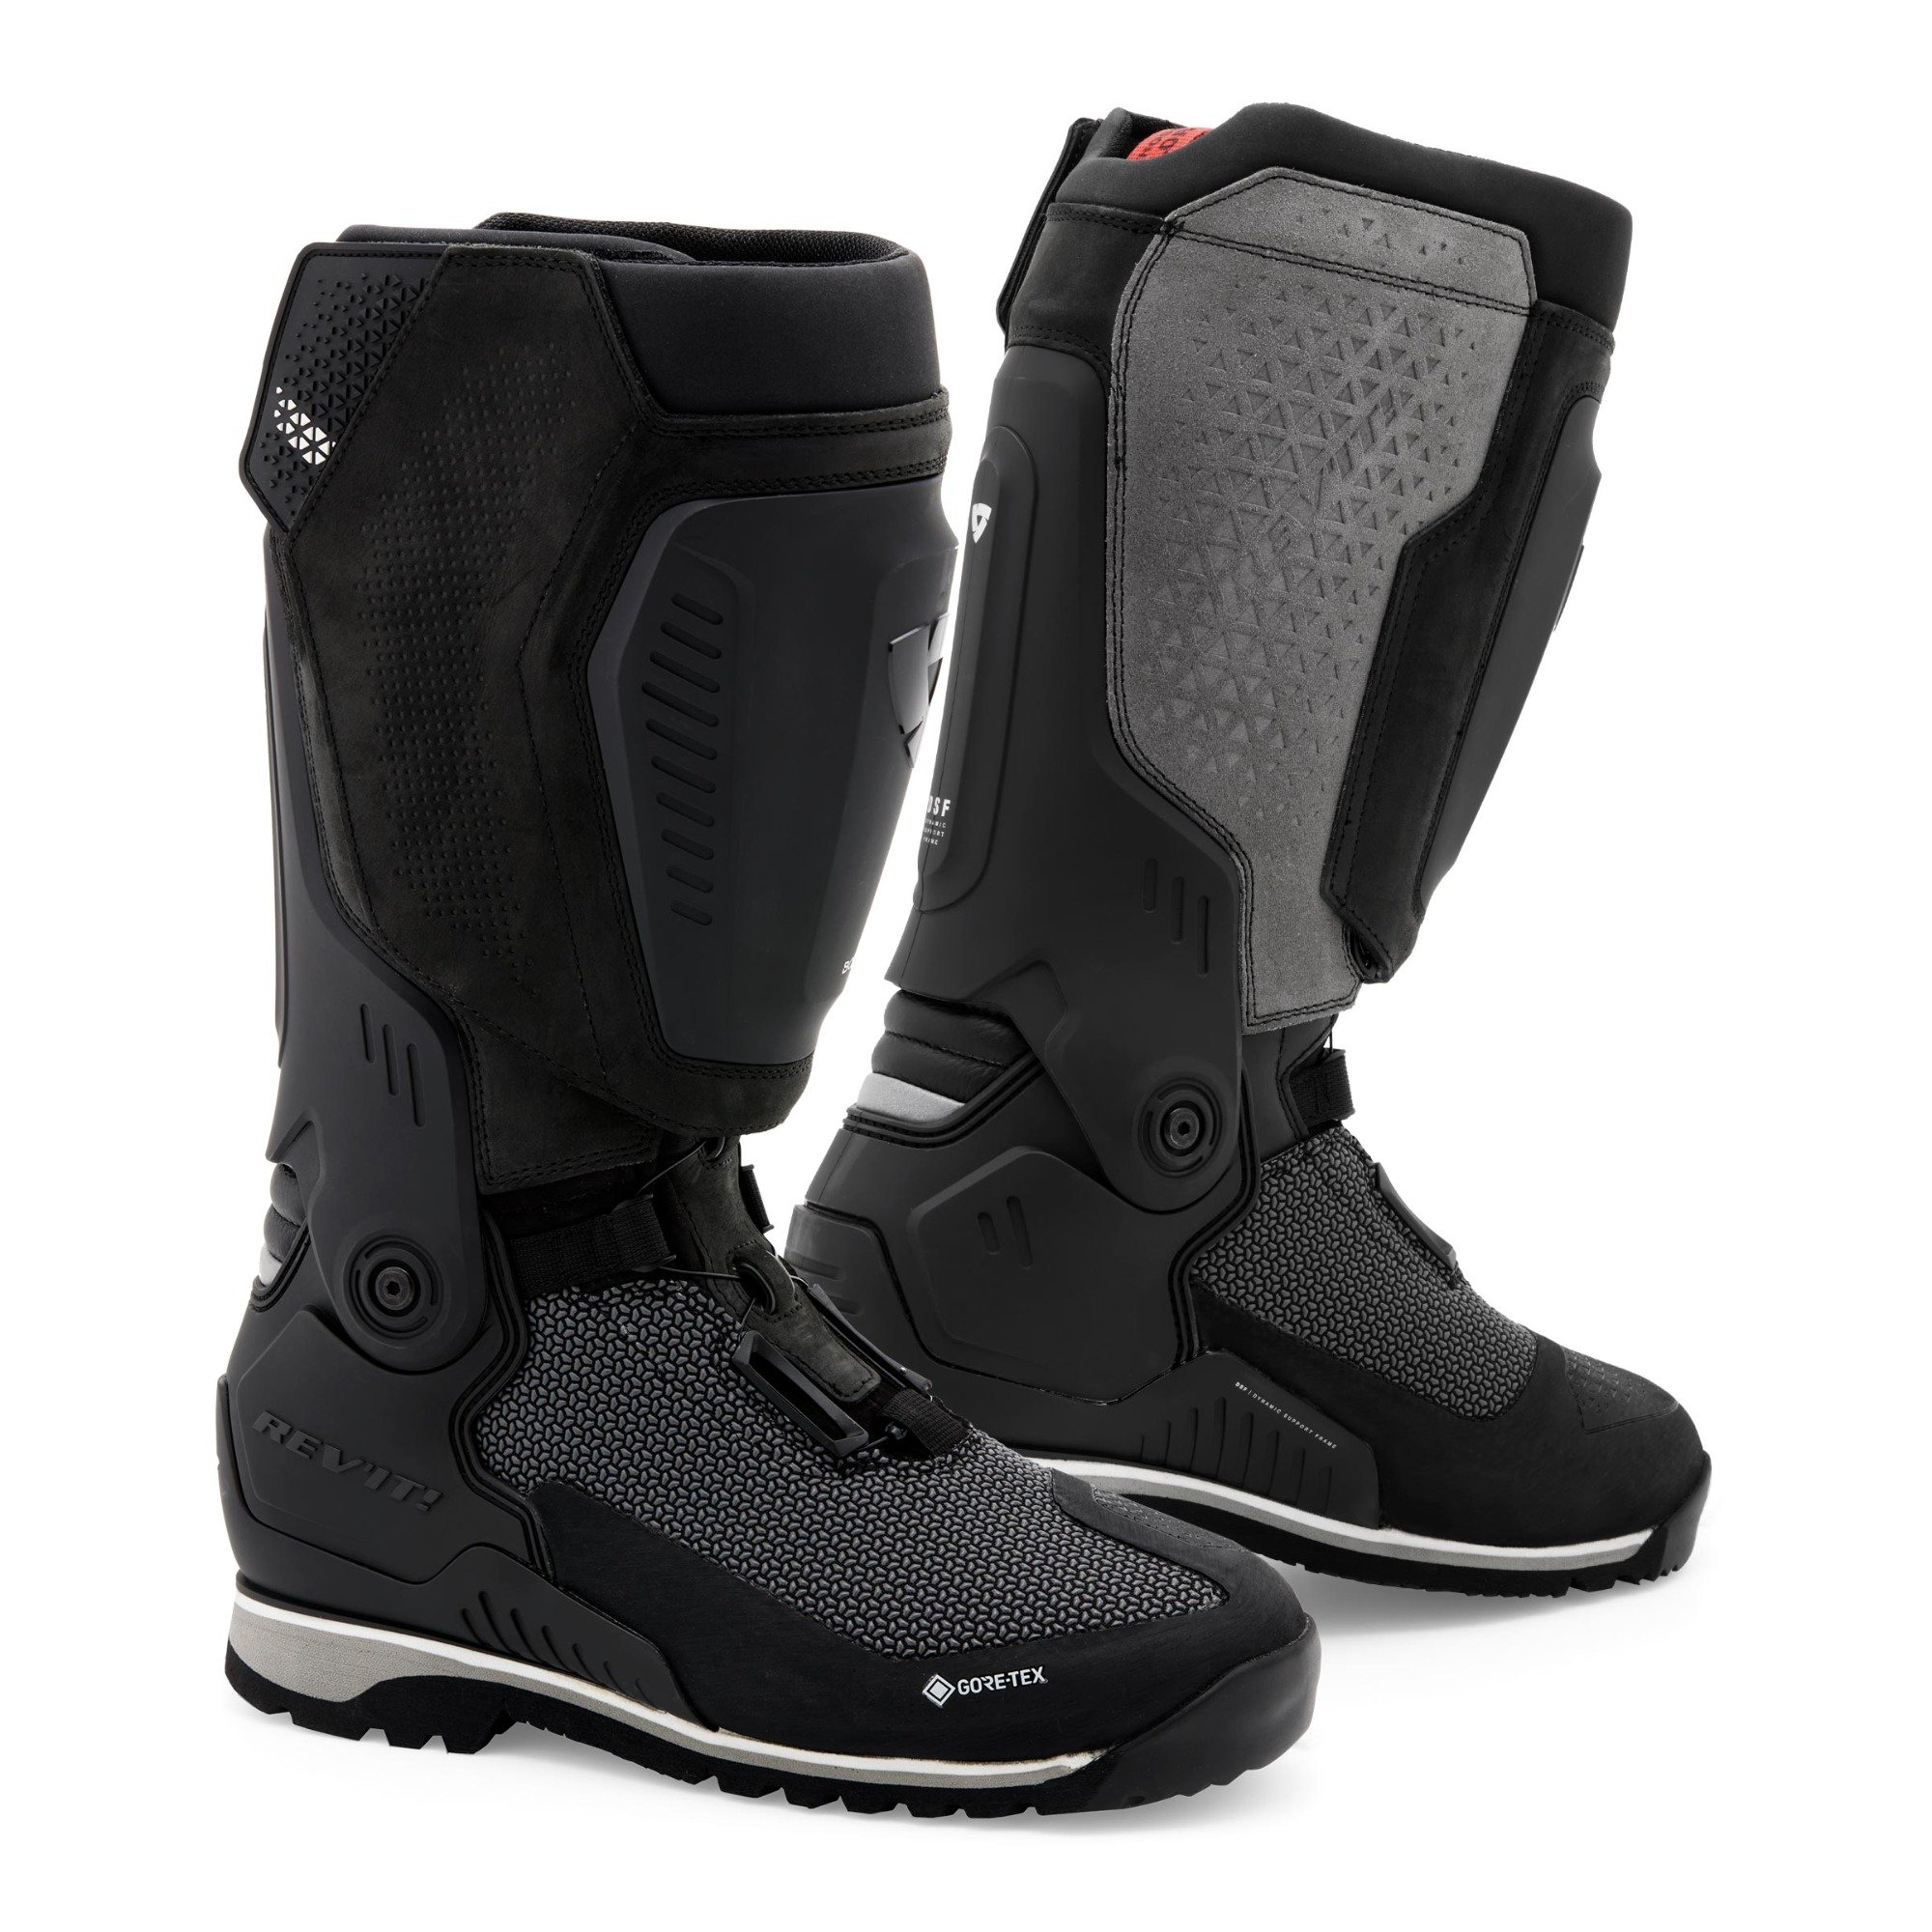 Image of REV'IT! Expedition GTX Boots Black Grey Size 44 ID 8700001327916